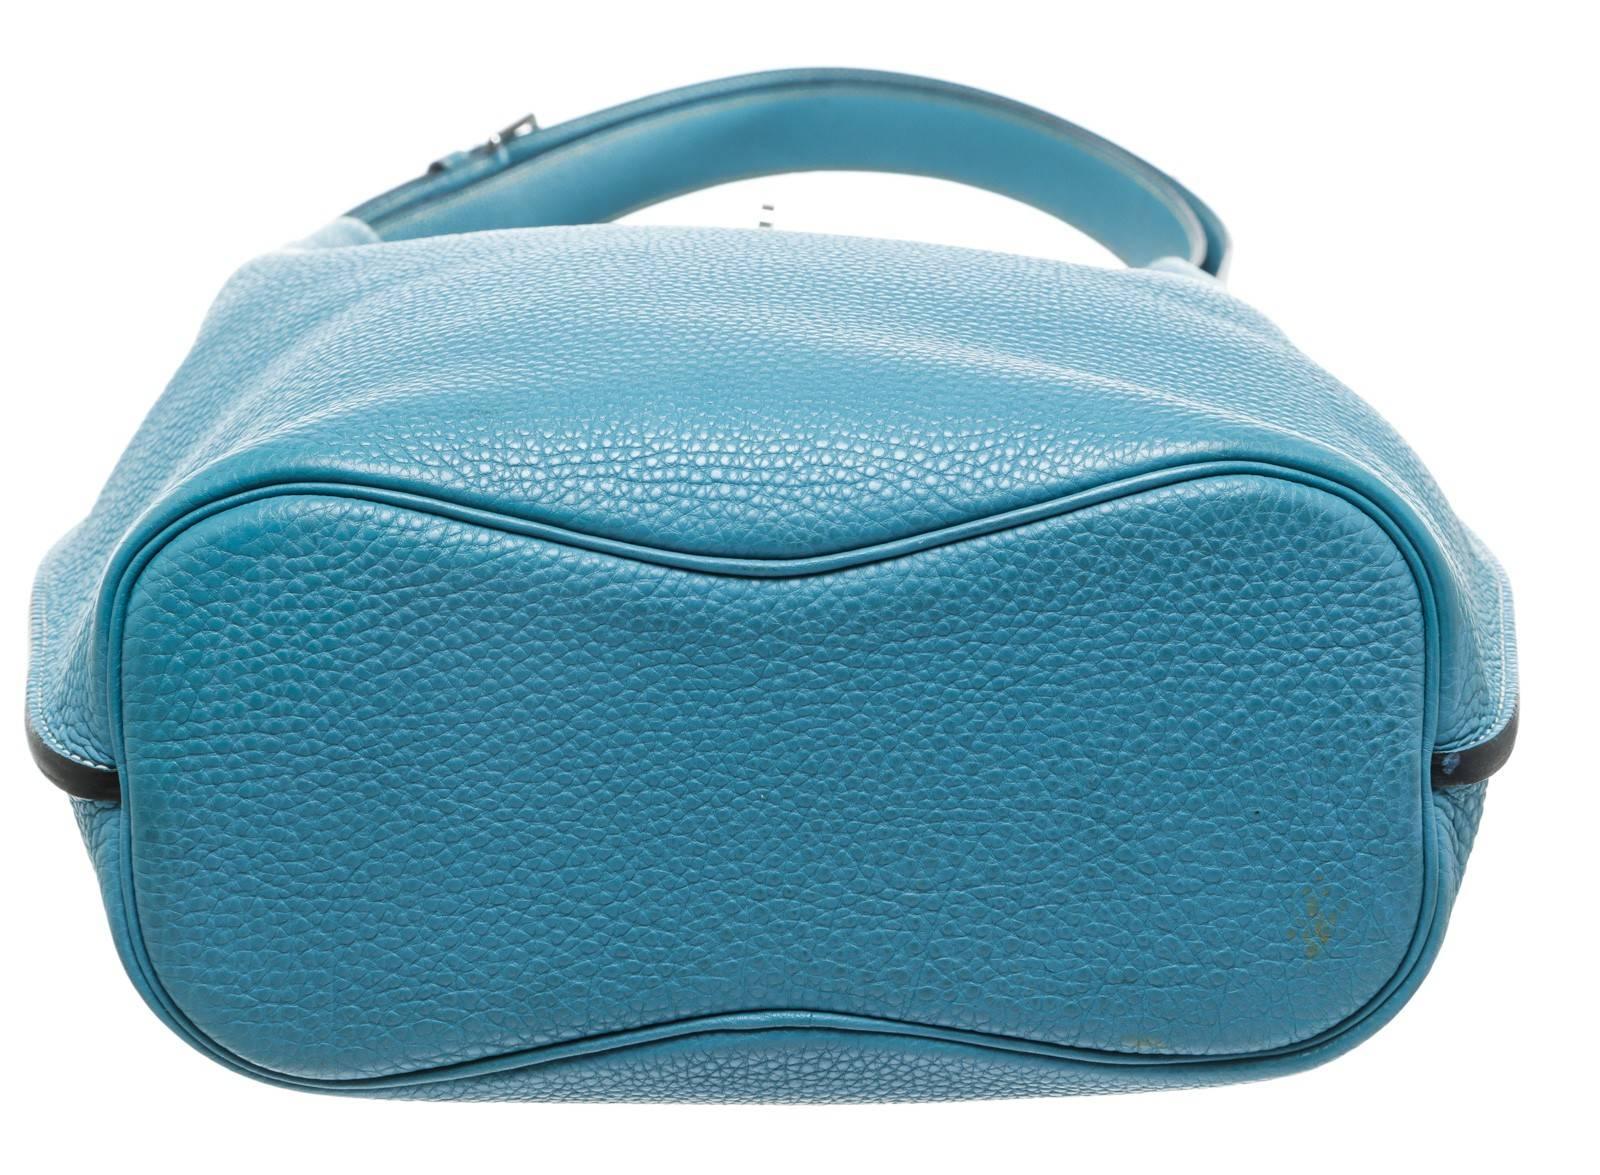 Designer: Hermes
Type: 
Handbag
Condition: 
Exterior: Pre-owned in very good condition 
Interior: Pre-owned in very good condition - minor wear
Color: 
Blue
Material: 
Leather
Dimensions: 
15